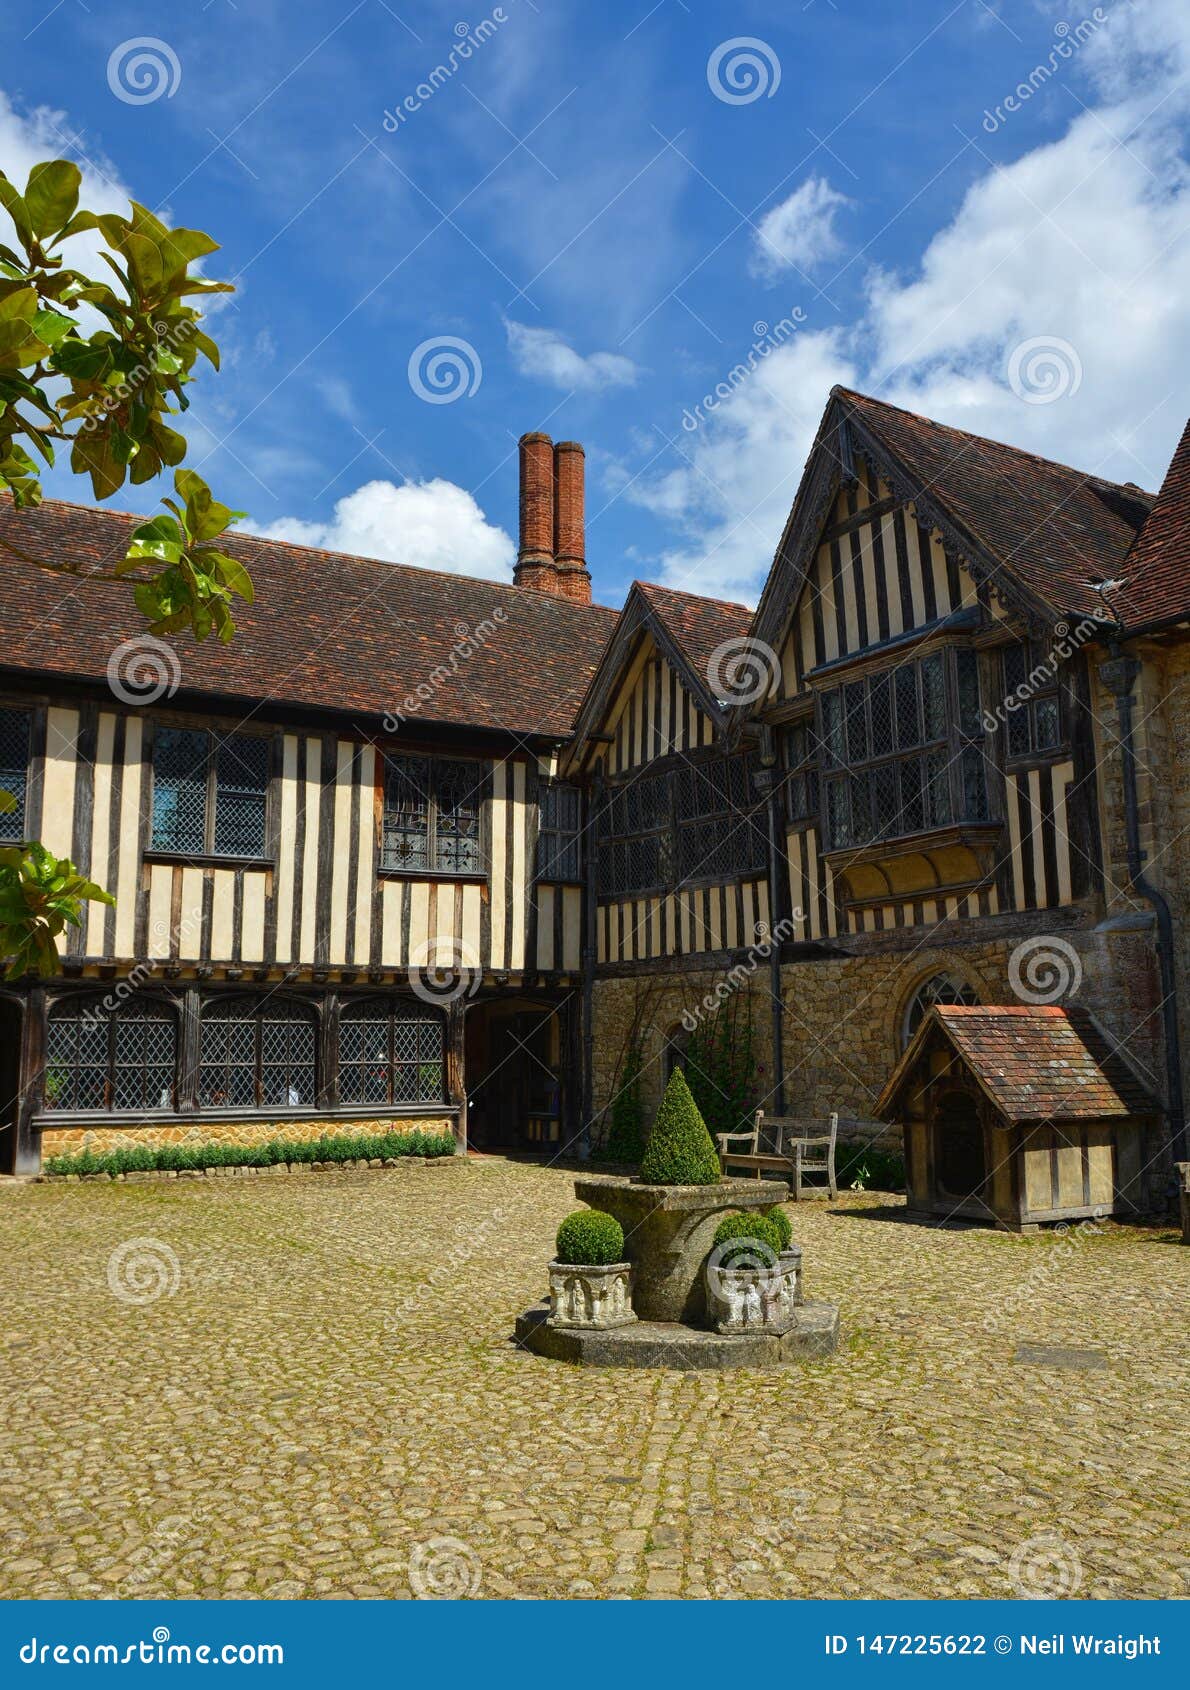 Igtham Mote Courtyard Medieval Manor House Editorial Photography Image Of Historical Century